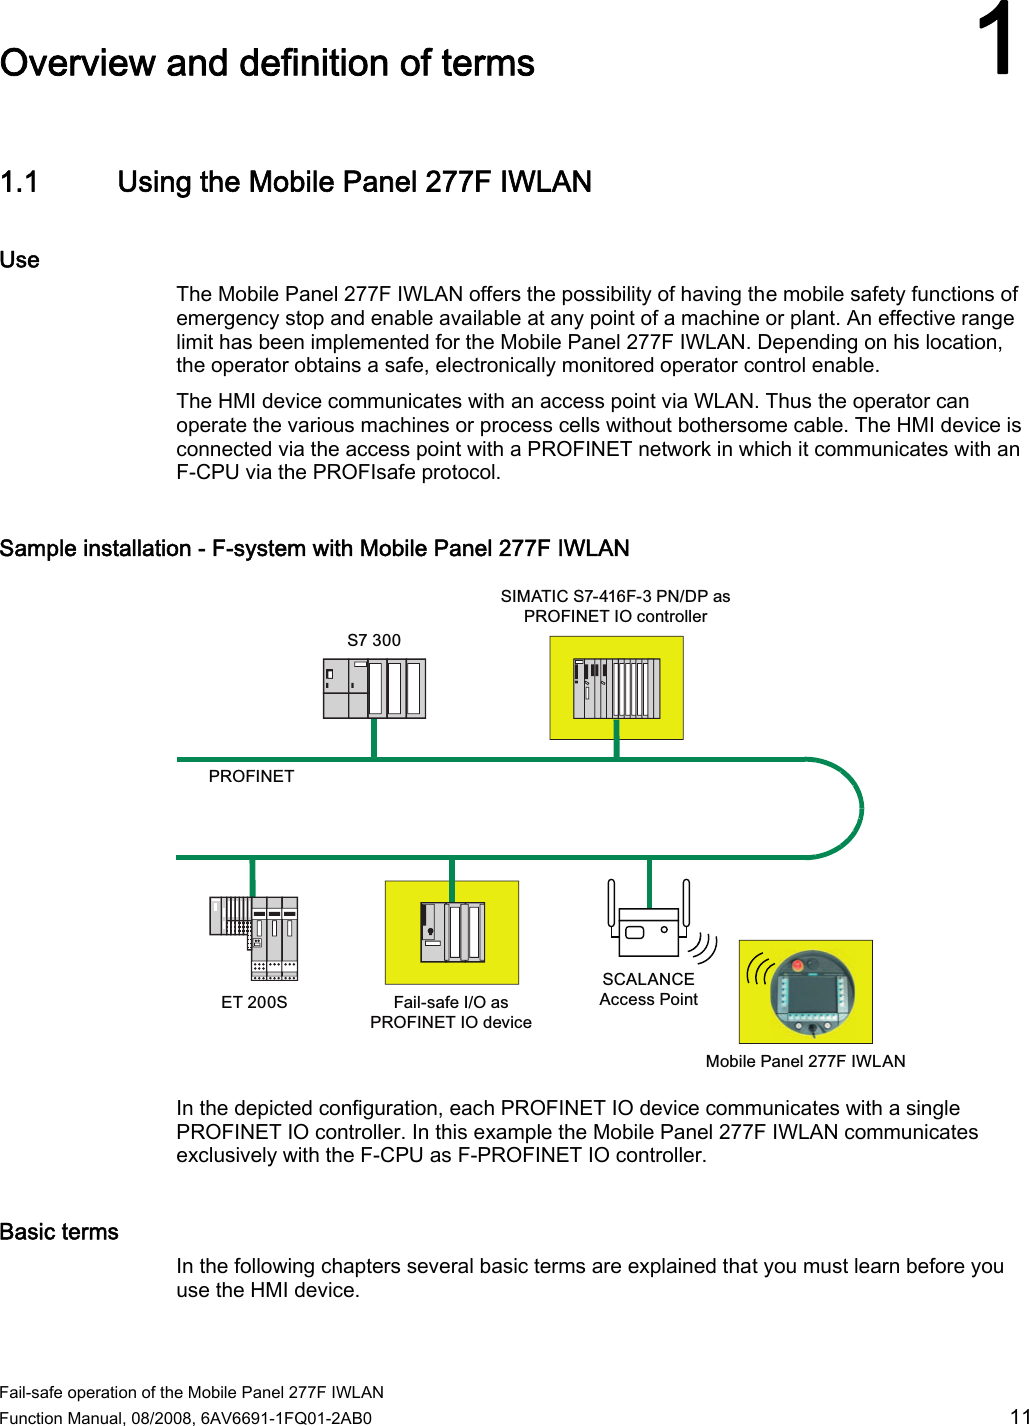  Fail-safe operation of the Mobile Panel 277F IWLAN  Function Manual, 08/2008, 6AV6691-1FQ01-2AB0  11 Overview and definition of terms 11.1 Using the Mobile Panel 277F IWLAN Use The Mobile Panel 277F IWLAN offers the possibility of having the mobile safety functions of emergency stop and enable available at any point of a machine or plant. An effective range limit has been implemented for the Mobile Panel 277F IWLAN. Depending on his location, the operator obtains a safe, electronically monitored operator control enable.  The HMI device communicates with an access point via WLAN. Thus the operator can operate the various machines or process cells without bothersome cable. The HMI device is connected via the access point with a PROFINET network in which it communicates with an F-CPU via the PROFIsafe protocol.  Sample installation - F-system with Mobile Panel 277F IWLAN 6(76352),1(70RELOH3DQHO),:/$16&amp;$/$1&amp;($FFHVV3RLQW6,0$7,&amp;6)31&apos;3DV352),1(7,2FRQWUROOHU)DLOVDIH,2DV352),1(7,2GHYLFH In the depicted configuration, each PROFINET IO device communicates with a single PROFINET IO controller. In this example the Mobile Panel 277F IWLAN communicates exclusively with the F-CPU as F-PROFINET IO controller. Basic terms In the following chapters several basic terms are explained that you must learn before you use the HMI device.  